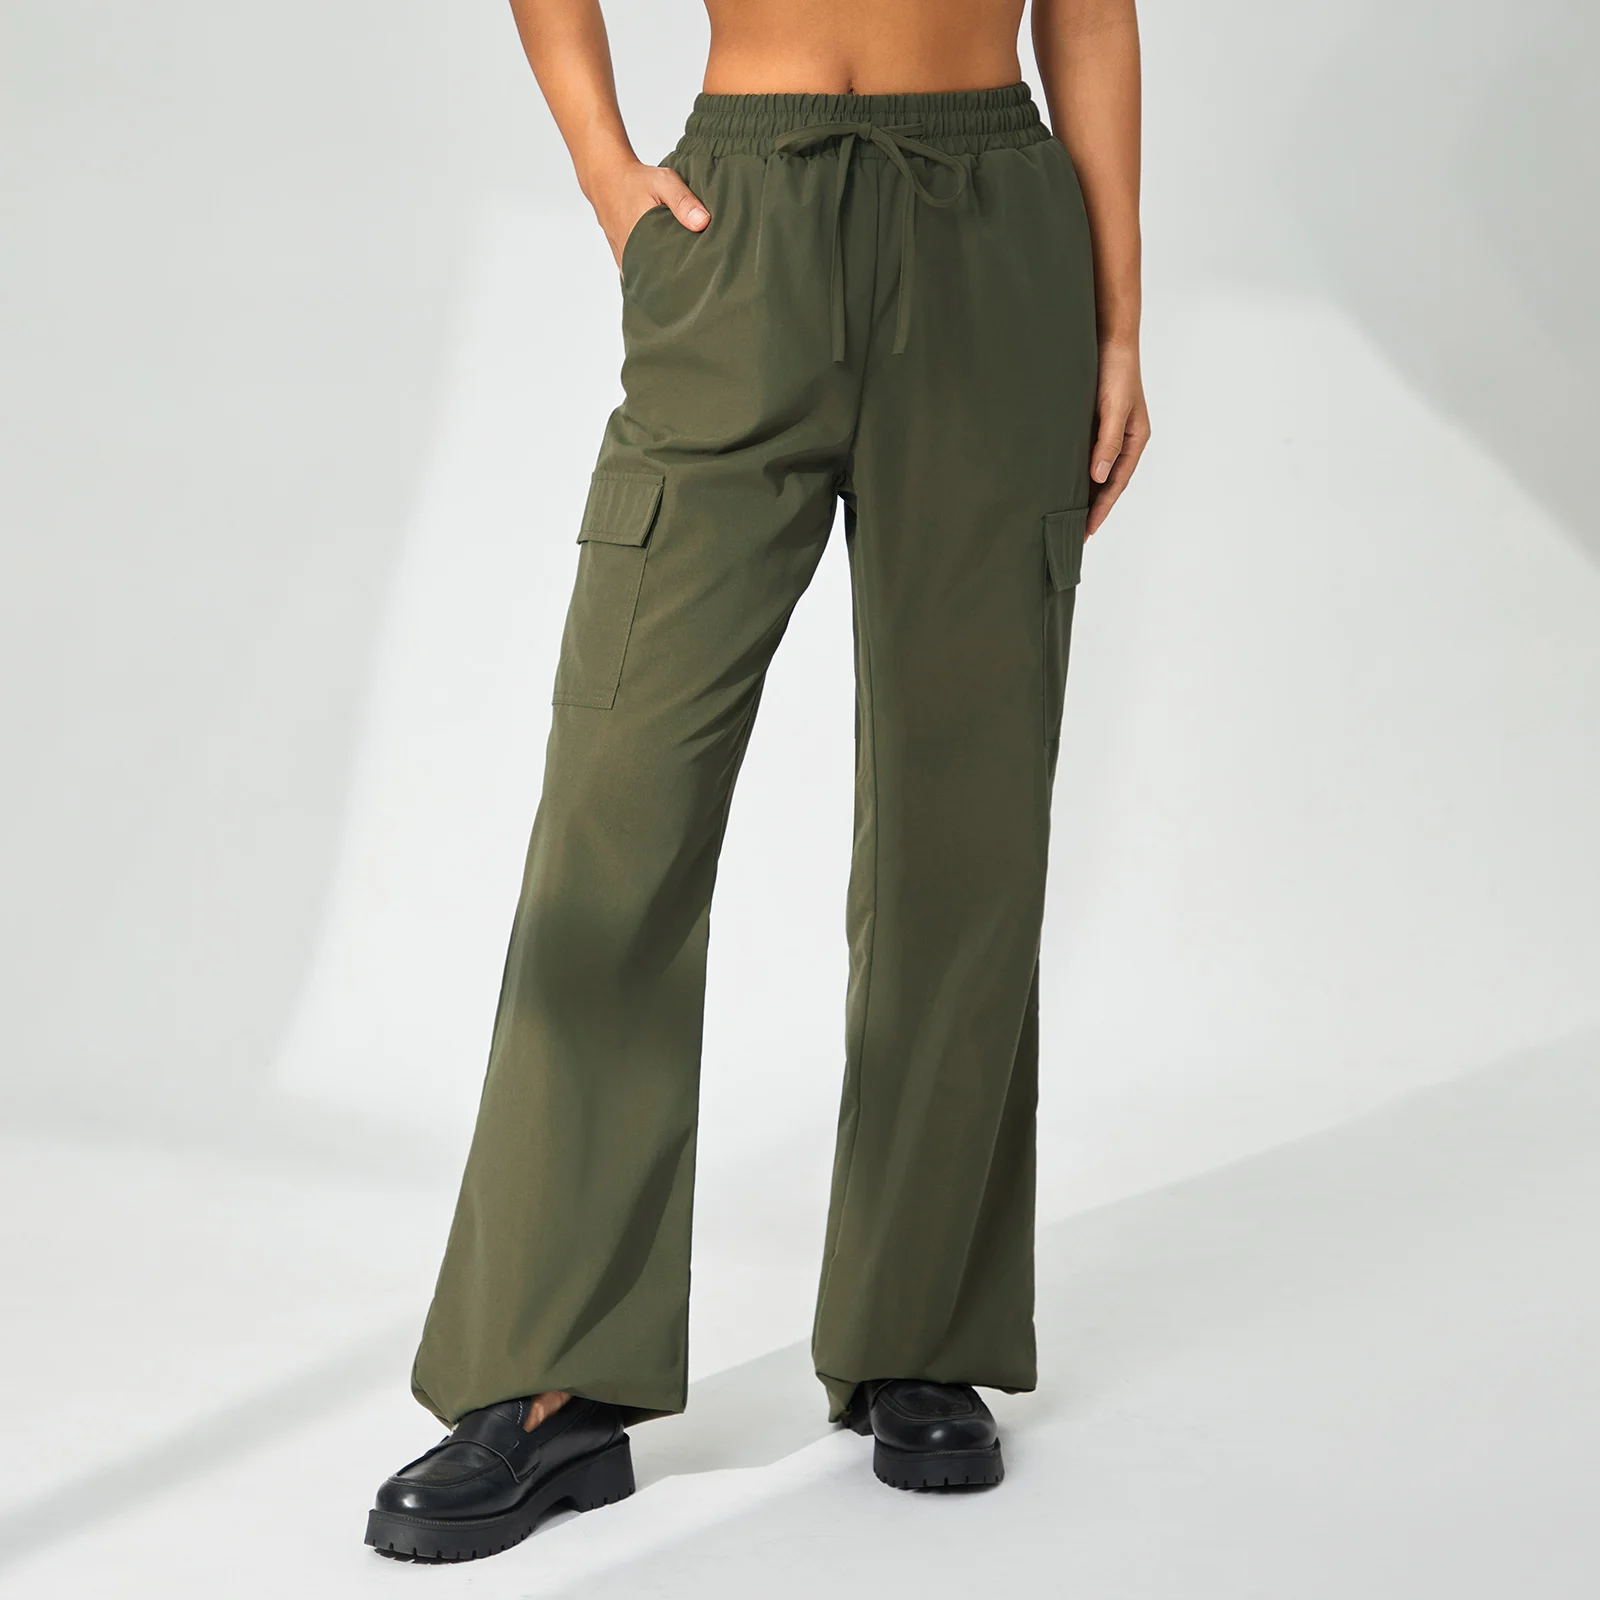 Spring Summer Women's Cargo Pants Wide-Leg Trousers Casual Solid Color Drawstring Elastic Waist Baggy Long Pants Streetwear